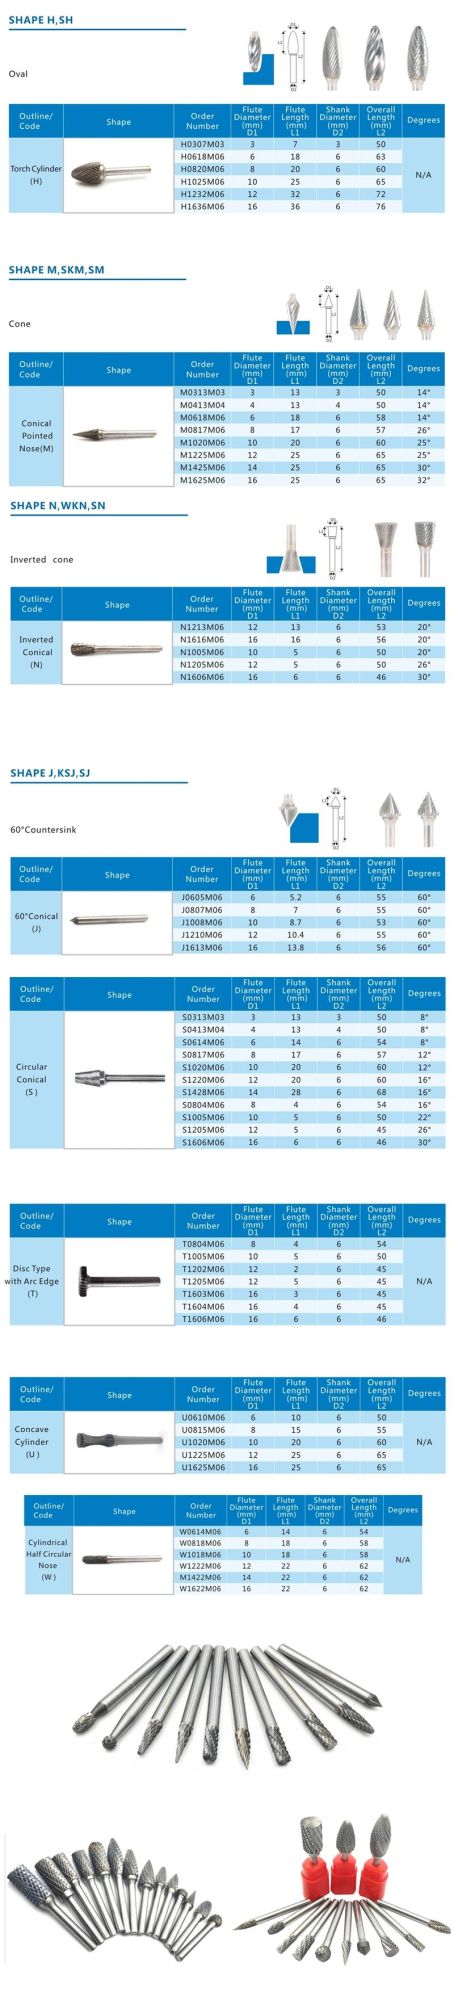 Standard Cemented Carbide Rotary Burr and Deburring Tools